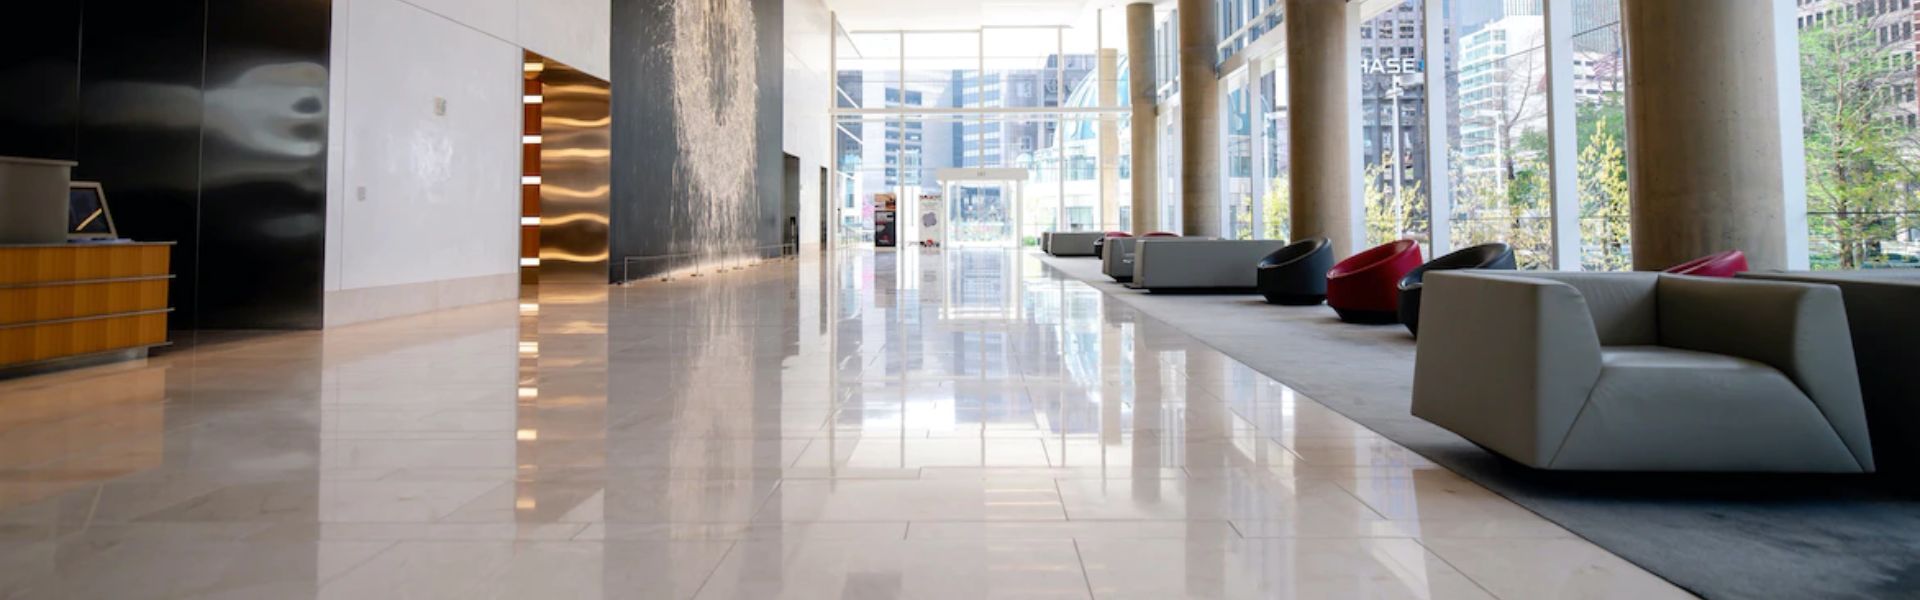 Invest in commercial cleaning services